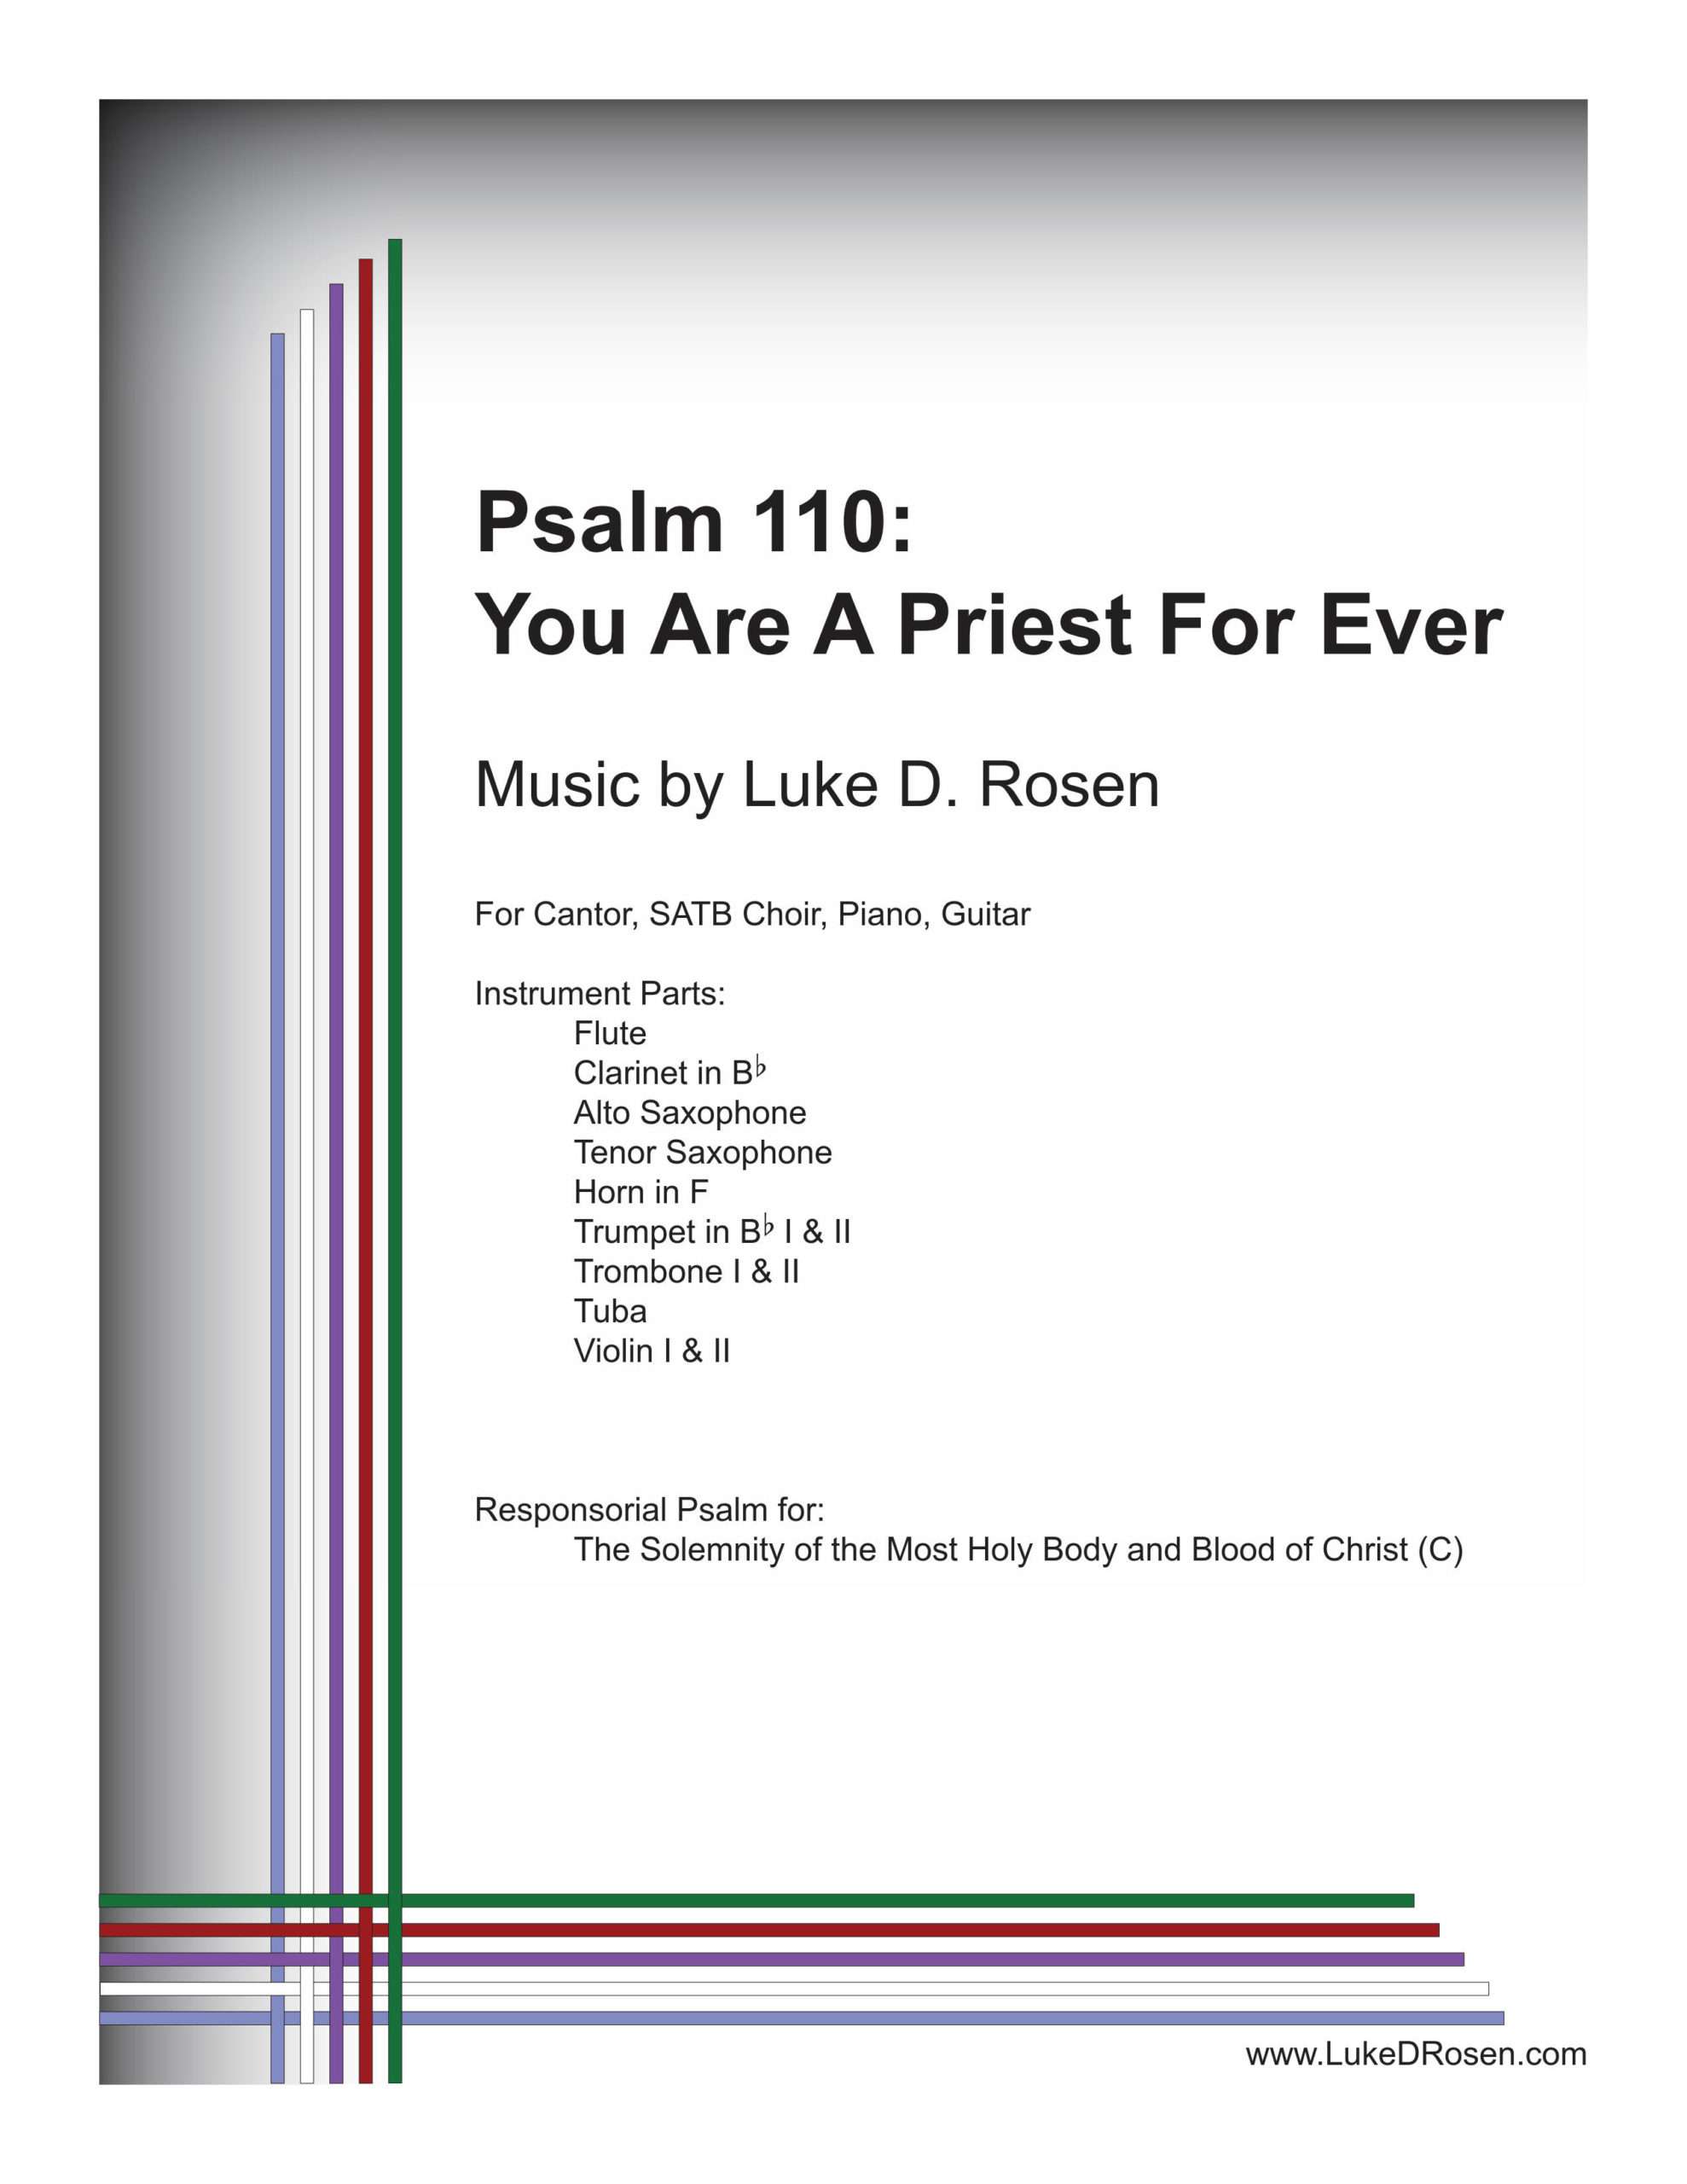 Psalm 110 – You Are A Priest For Ever (Rosen)